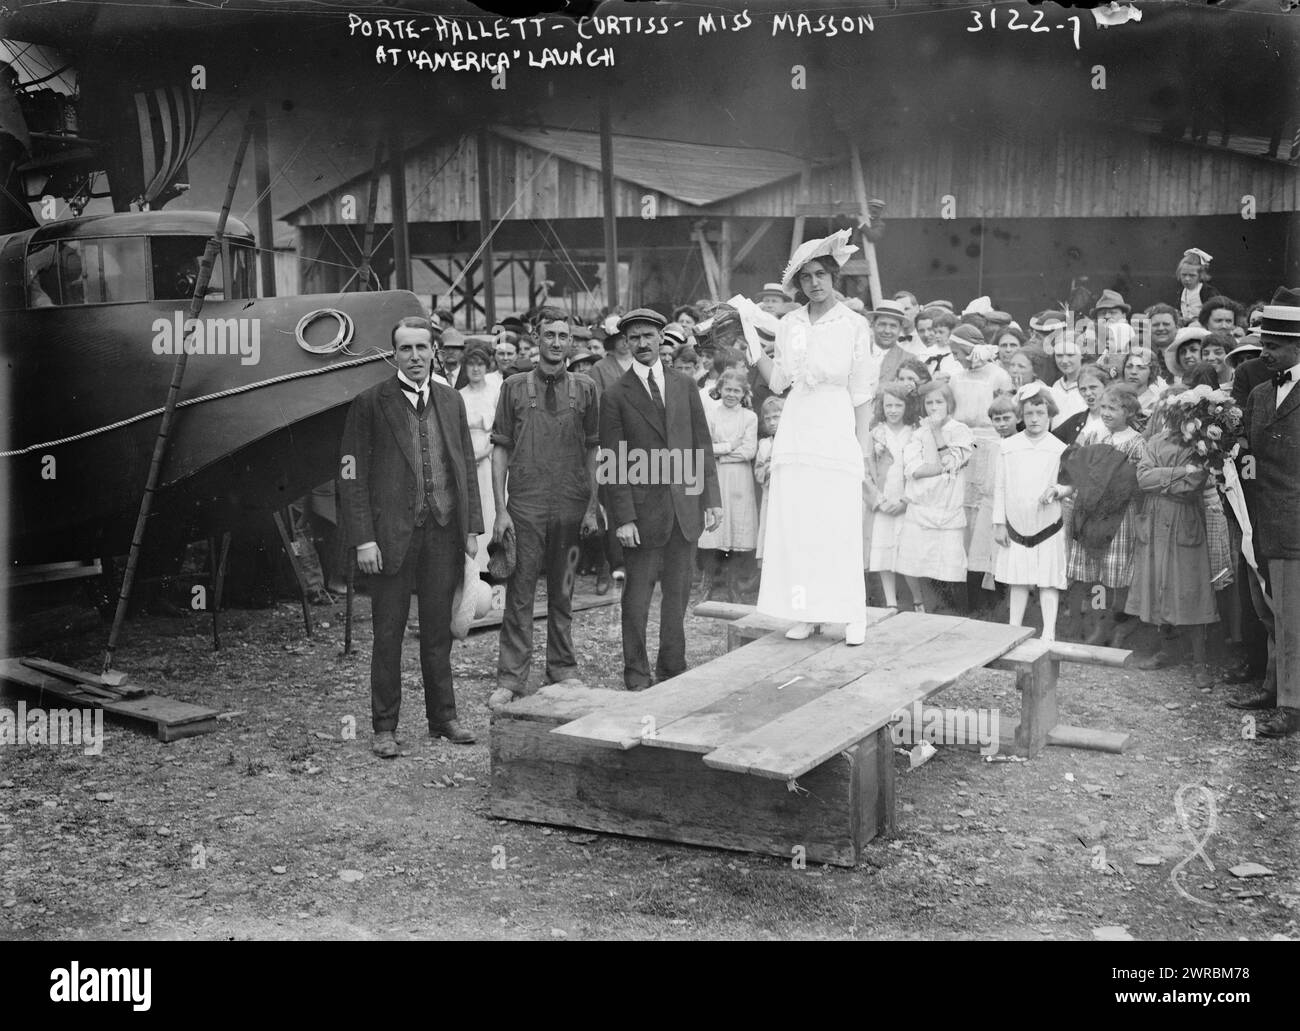 Porte, Hallett, Curtiss, Miss Masson, at 'America' launch, Photograph shows the christening and launch of the Curtiss Model H Flying Boat airplane 'America' on June 22, 1914 in Hammondsport, New York. From left to right, aviators John Cyril Porte, George E.A. Hallett, builder Glenn Curtiss and Katherine Masson., 1914 June 22, Glass negatives, 1 negative: glass Stock Photo